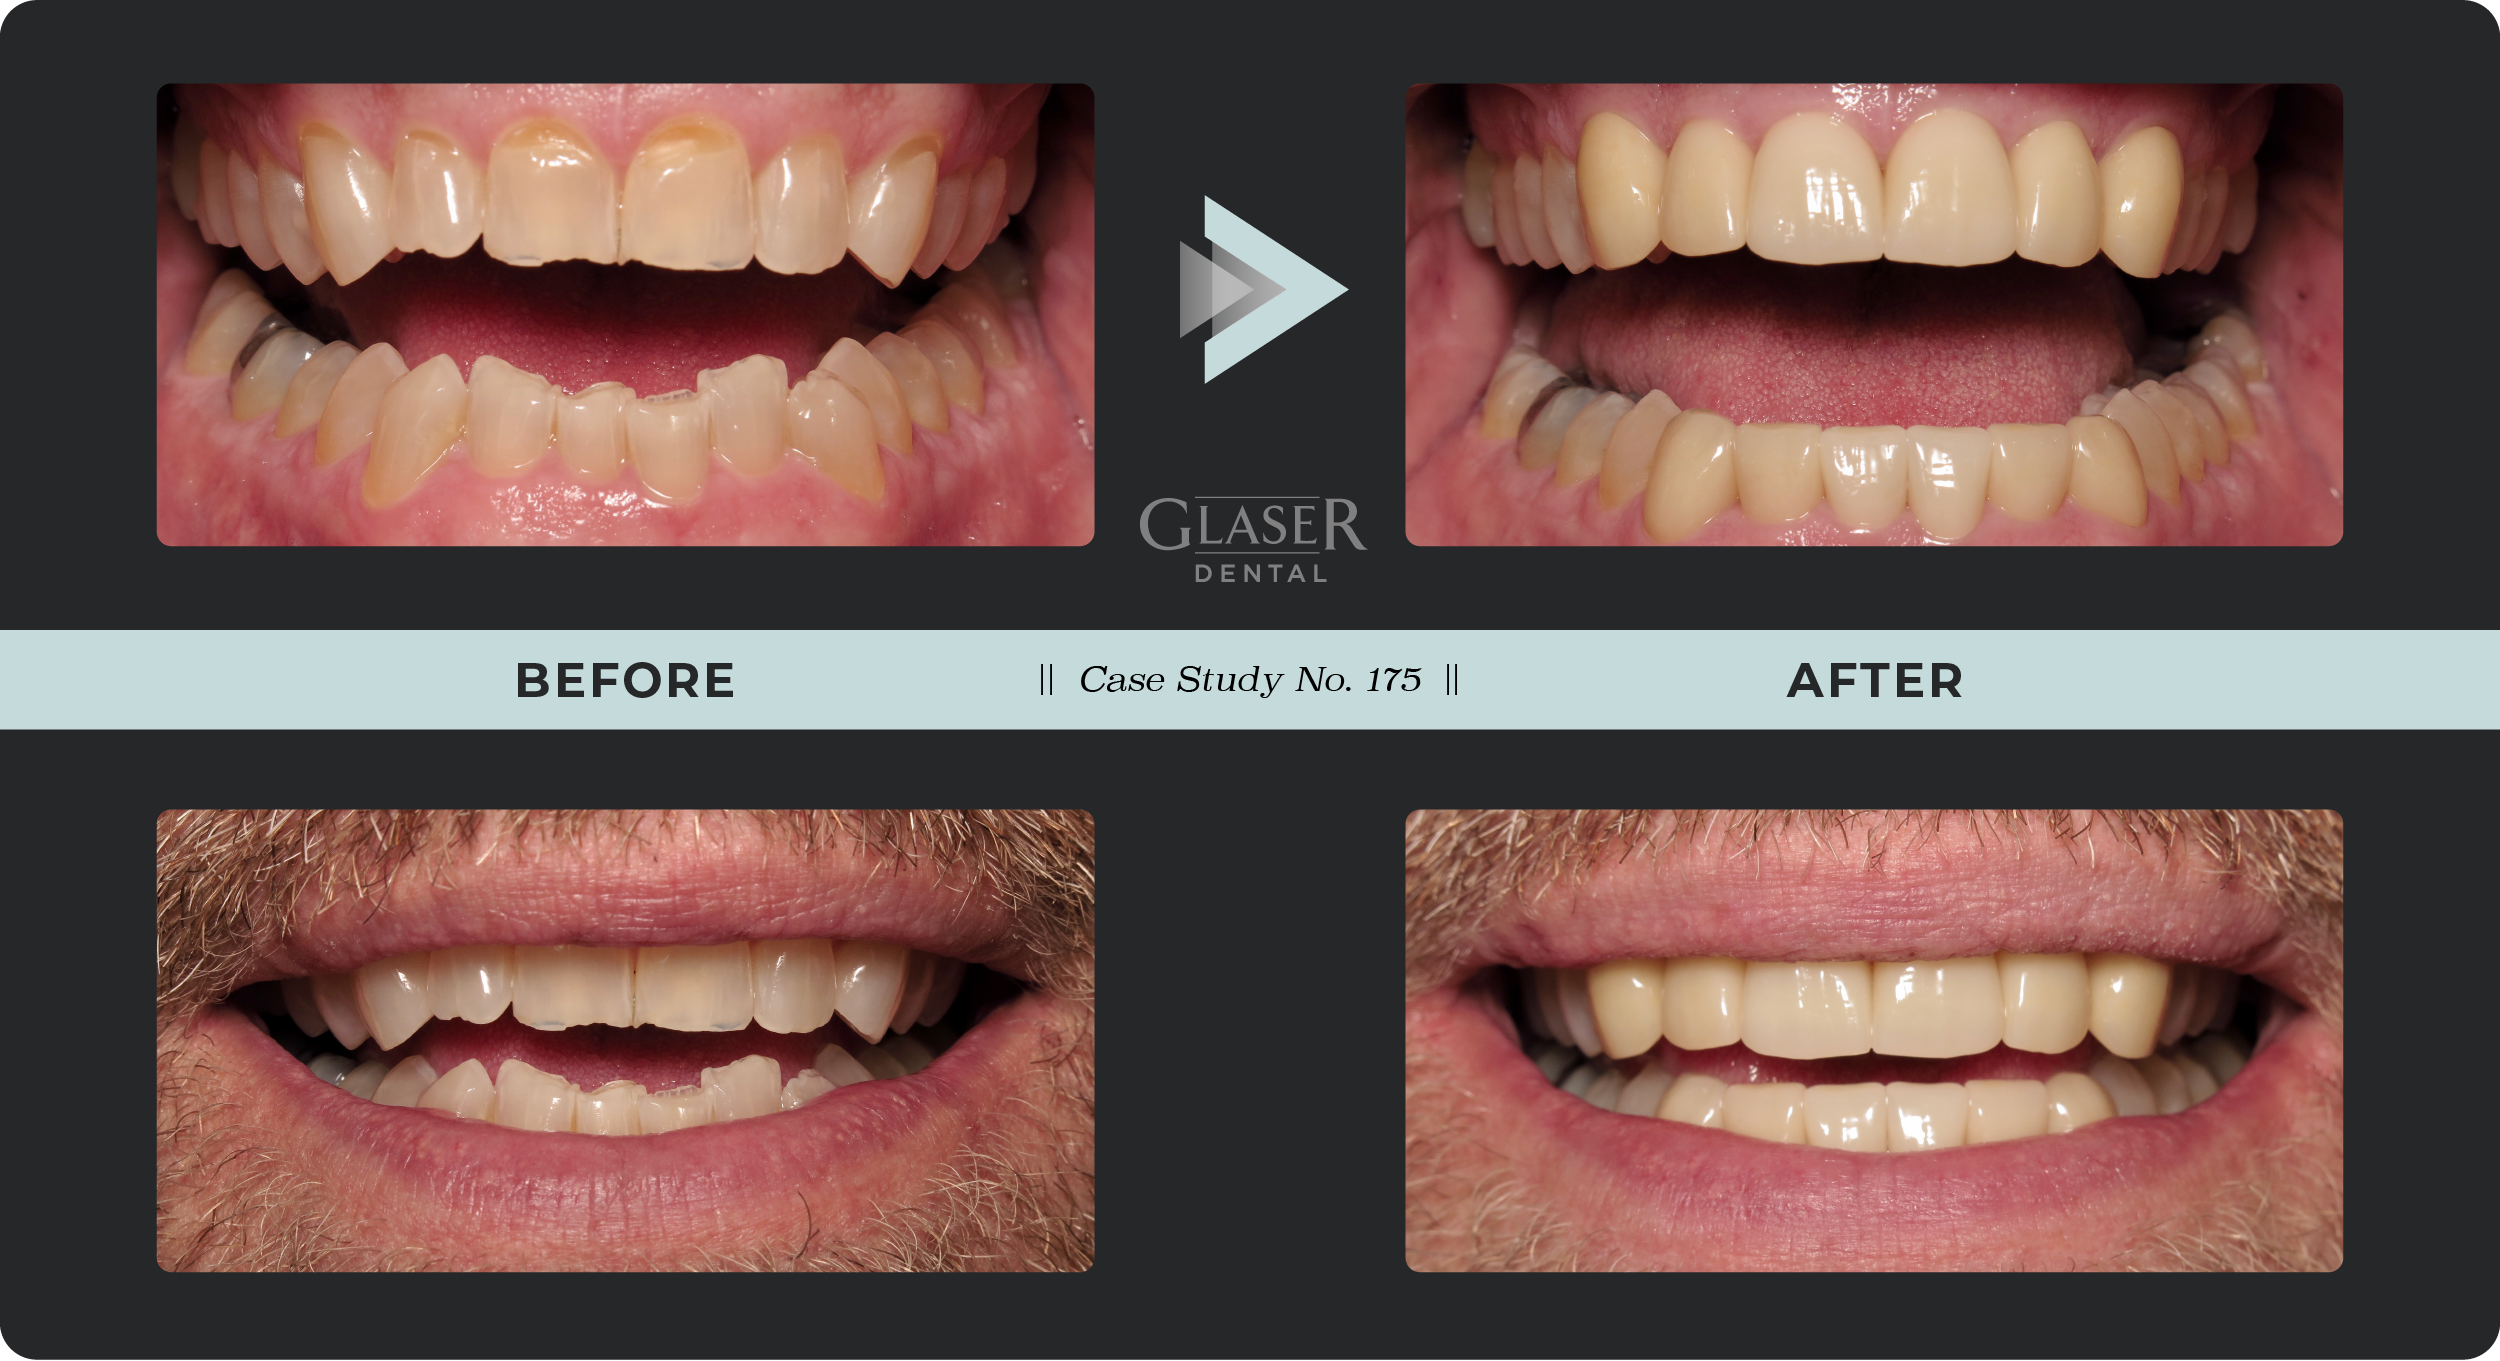 Before & After Photo Comparing Dental Problem and Results of Solution